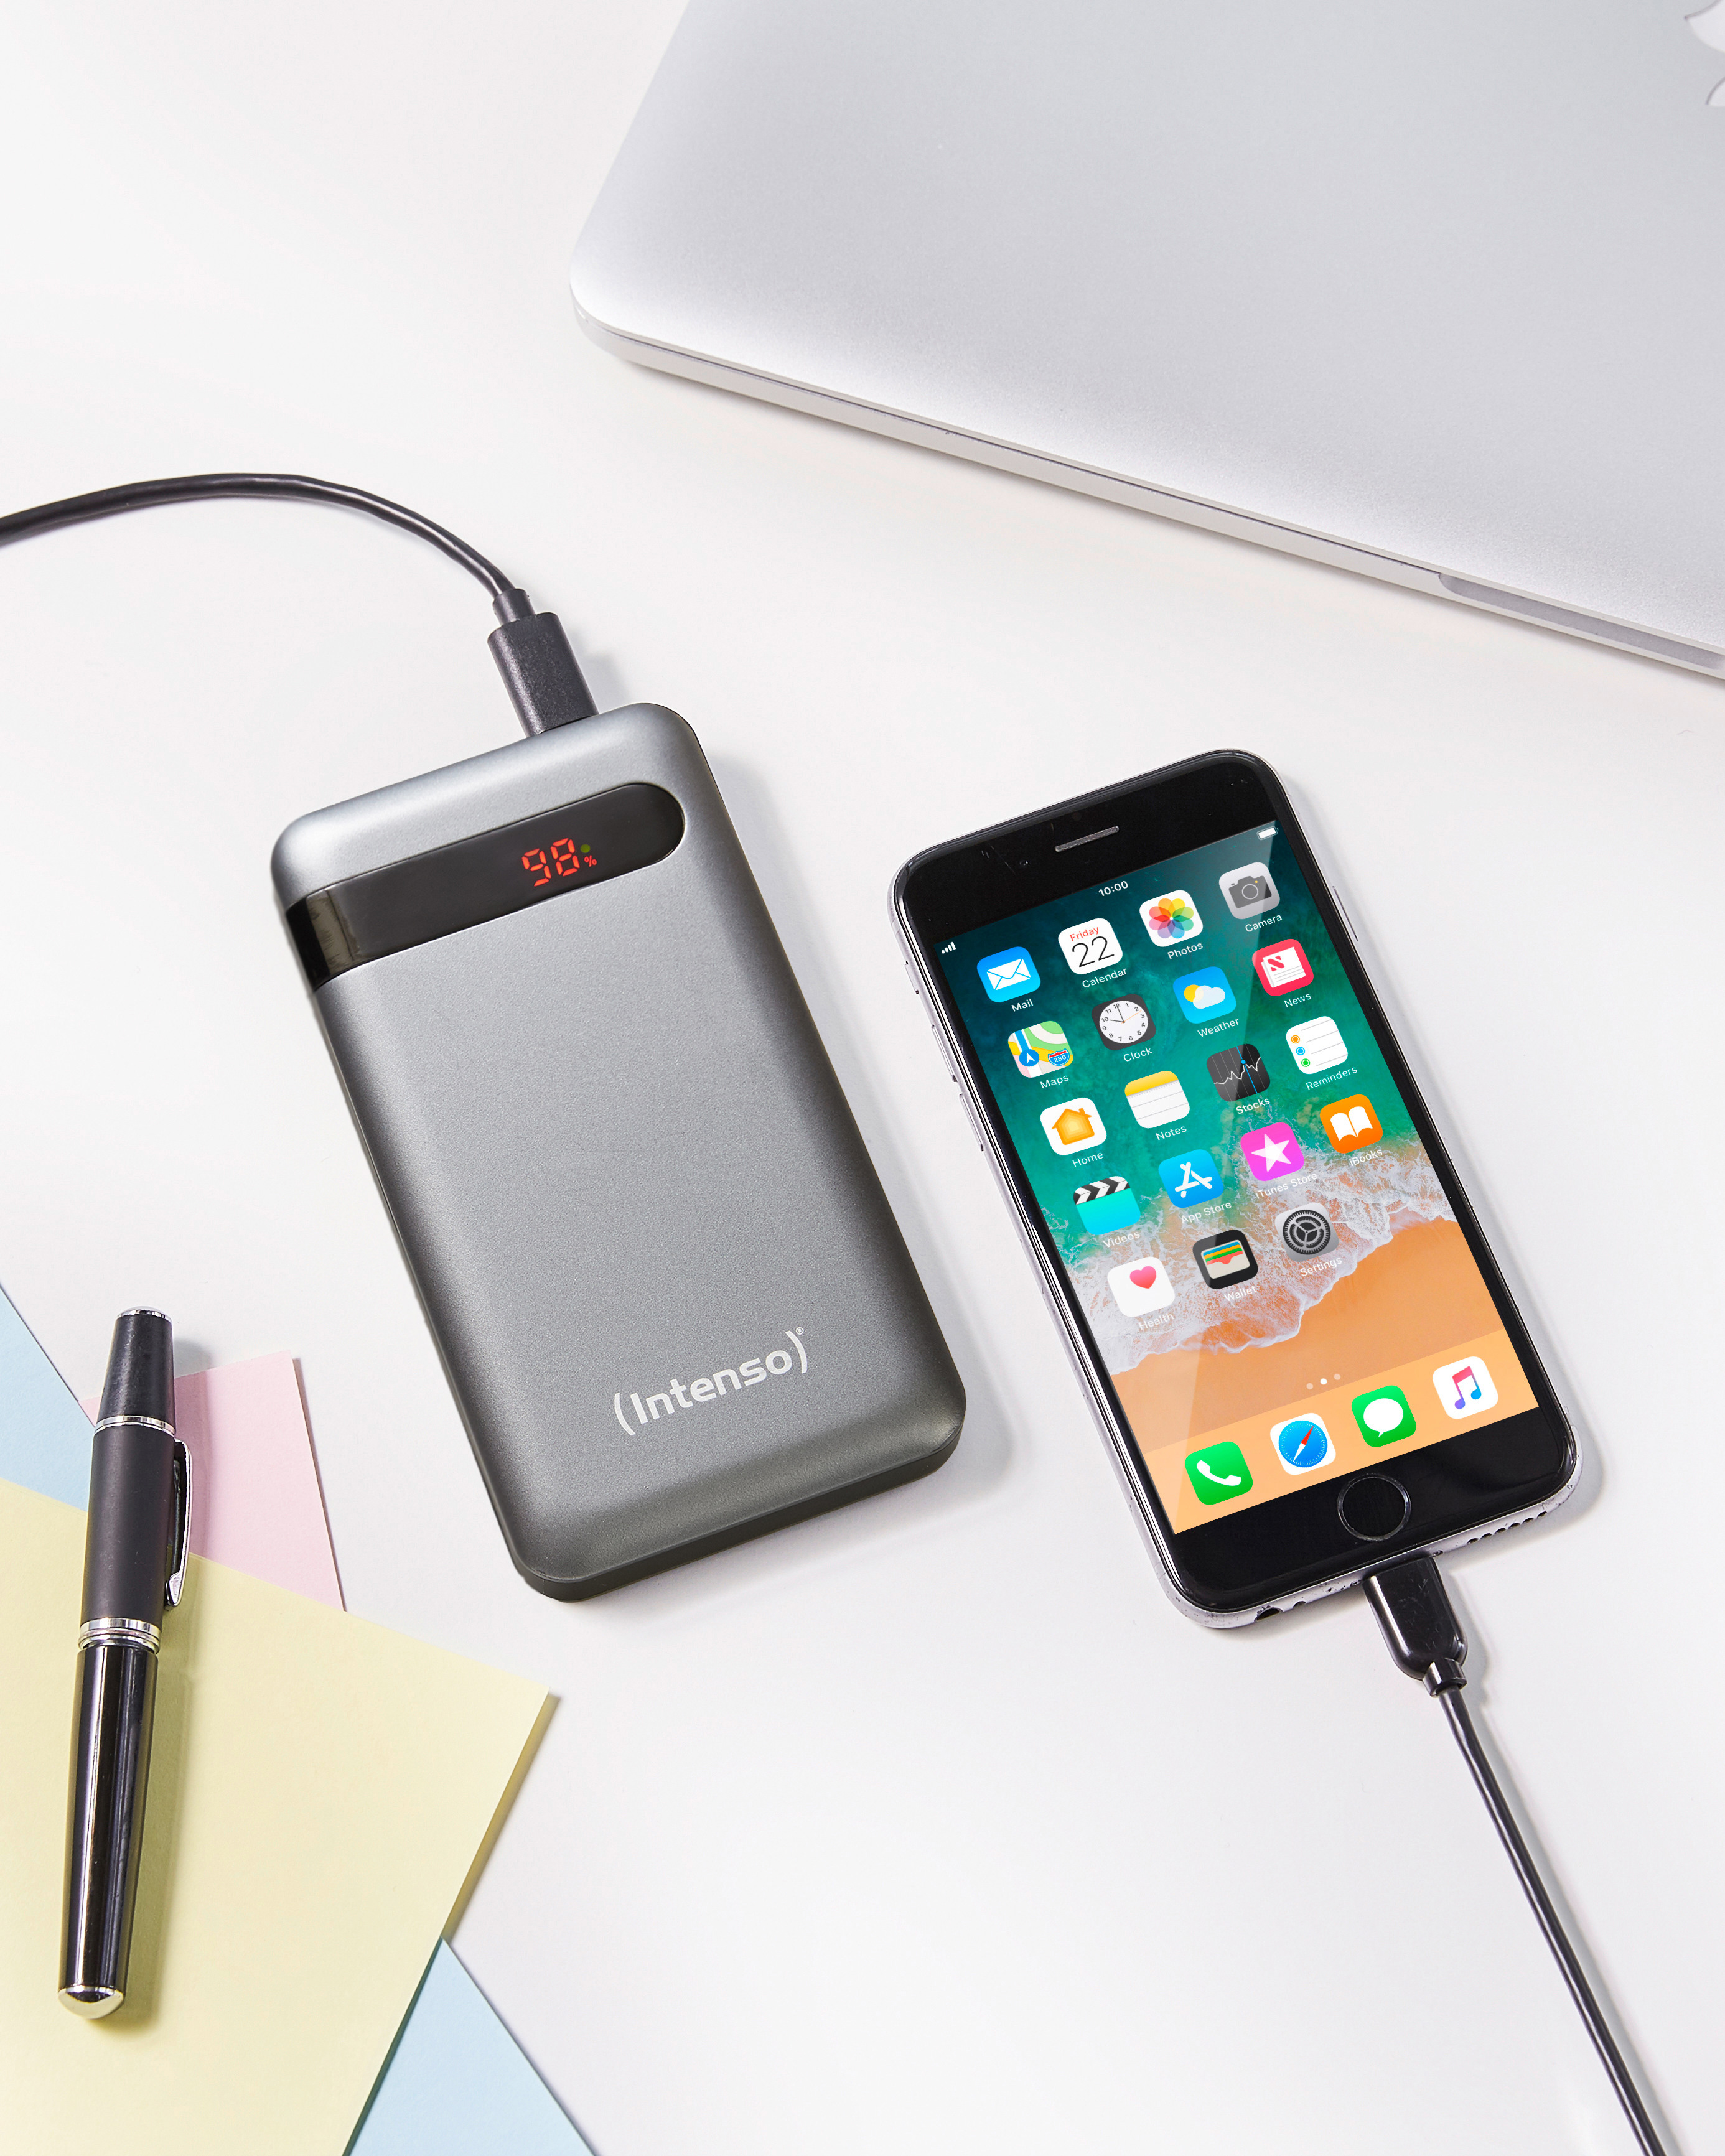 INTENSO Power Delivery Powerbank 7332330 PD10000 antr.